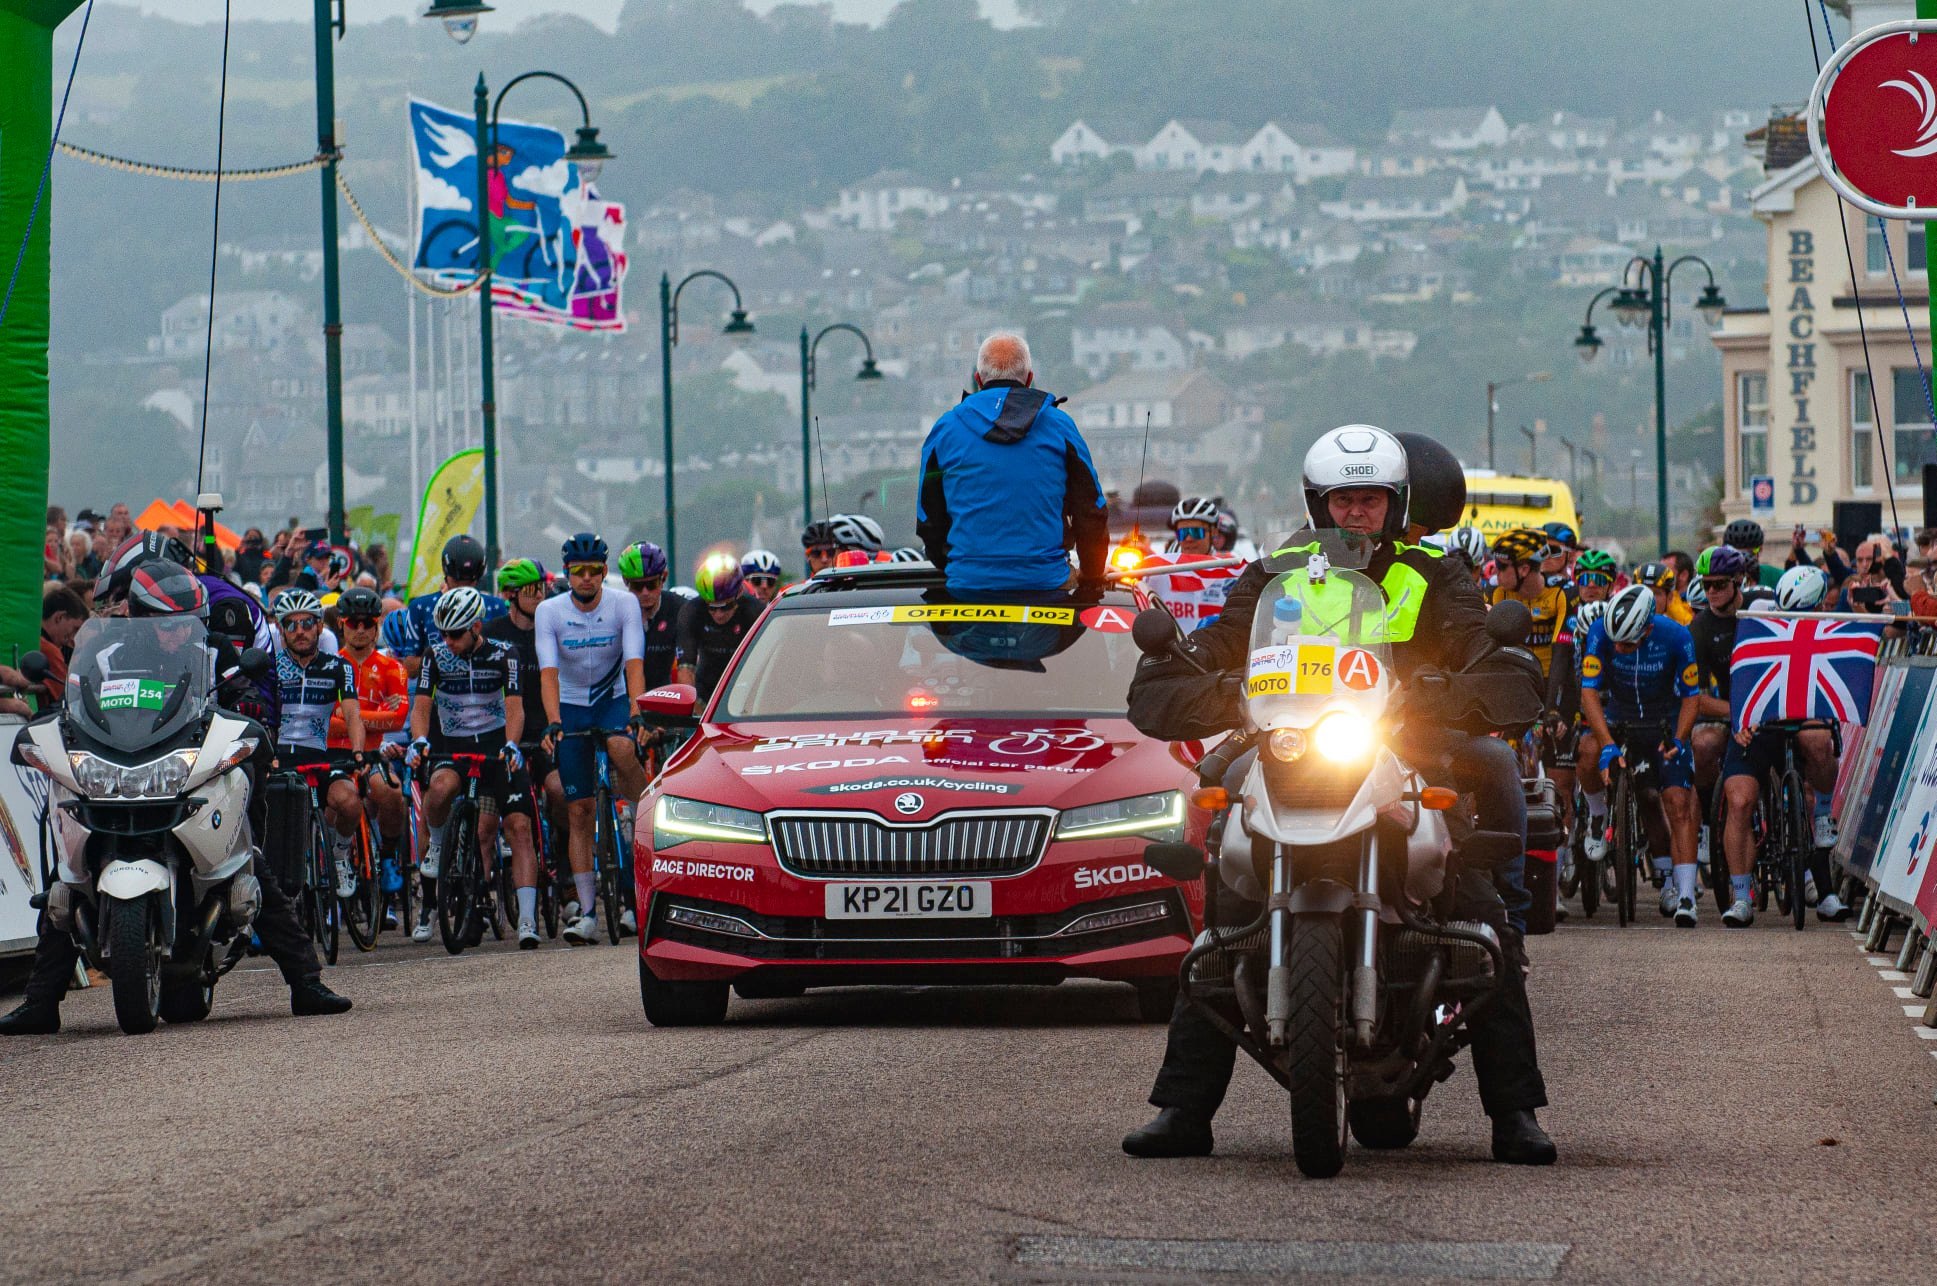 The start line in Penzance Picture: Jory Mundy/Packet Camera Club